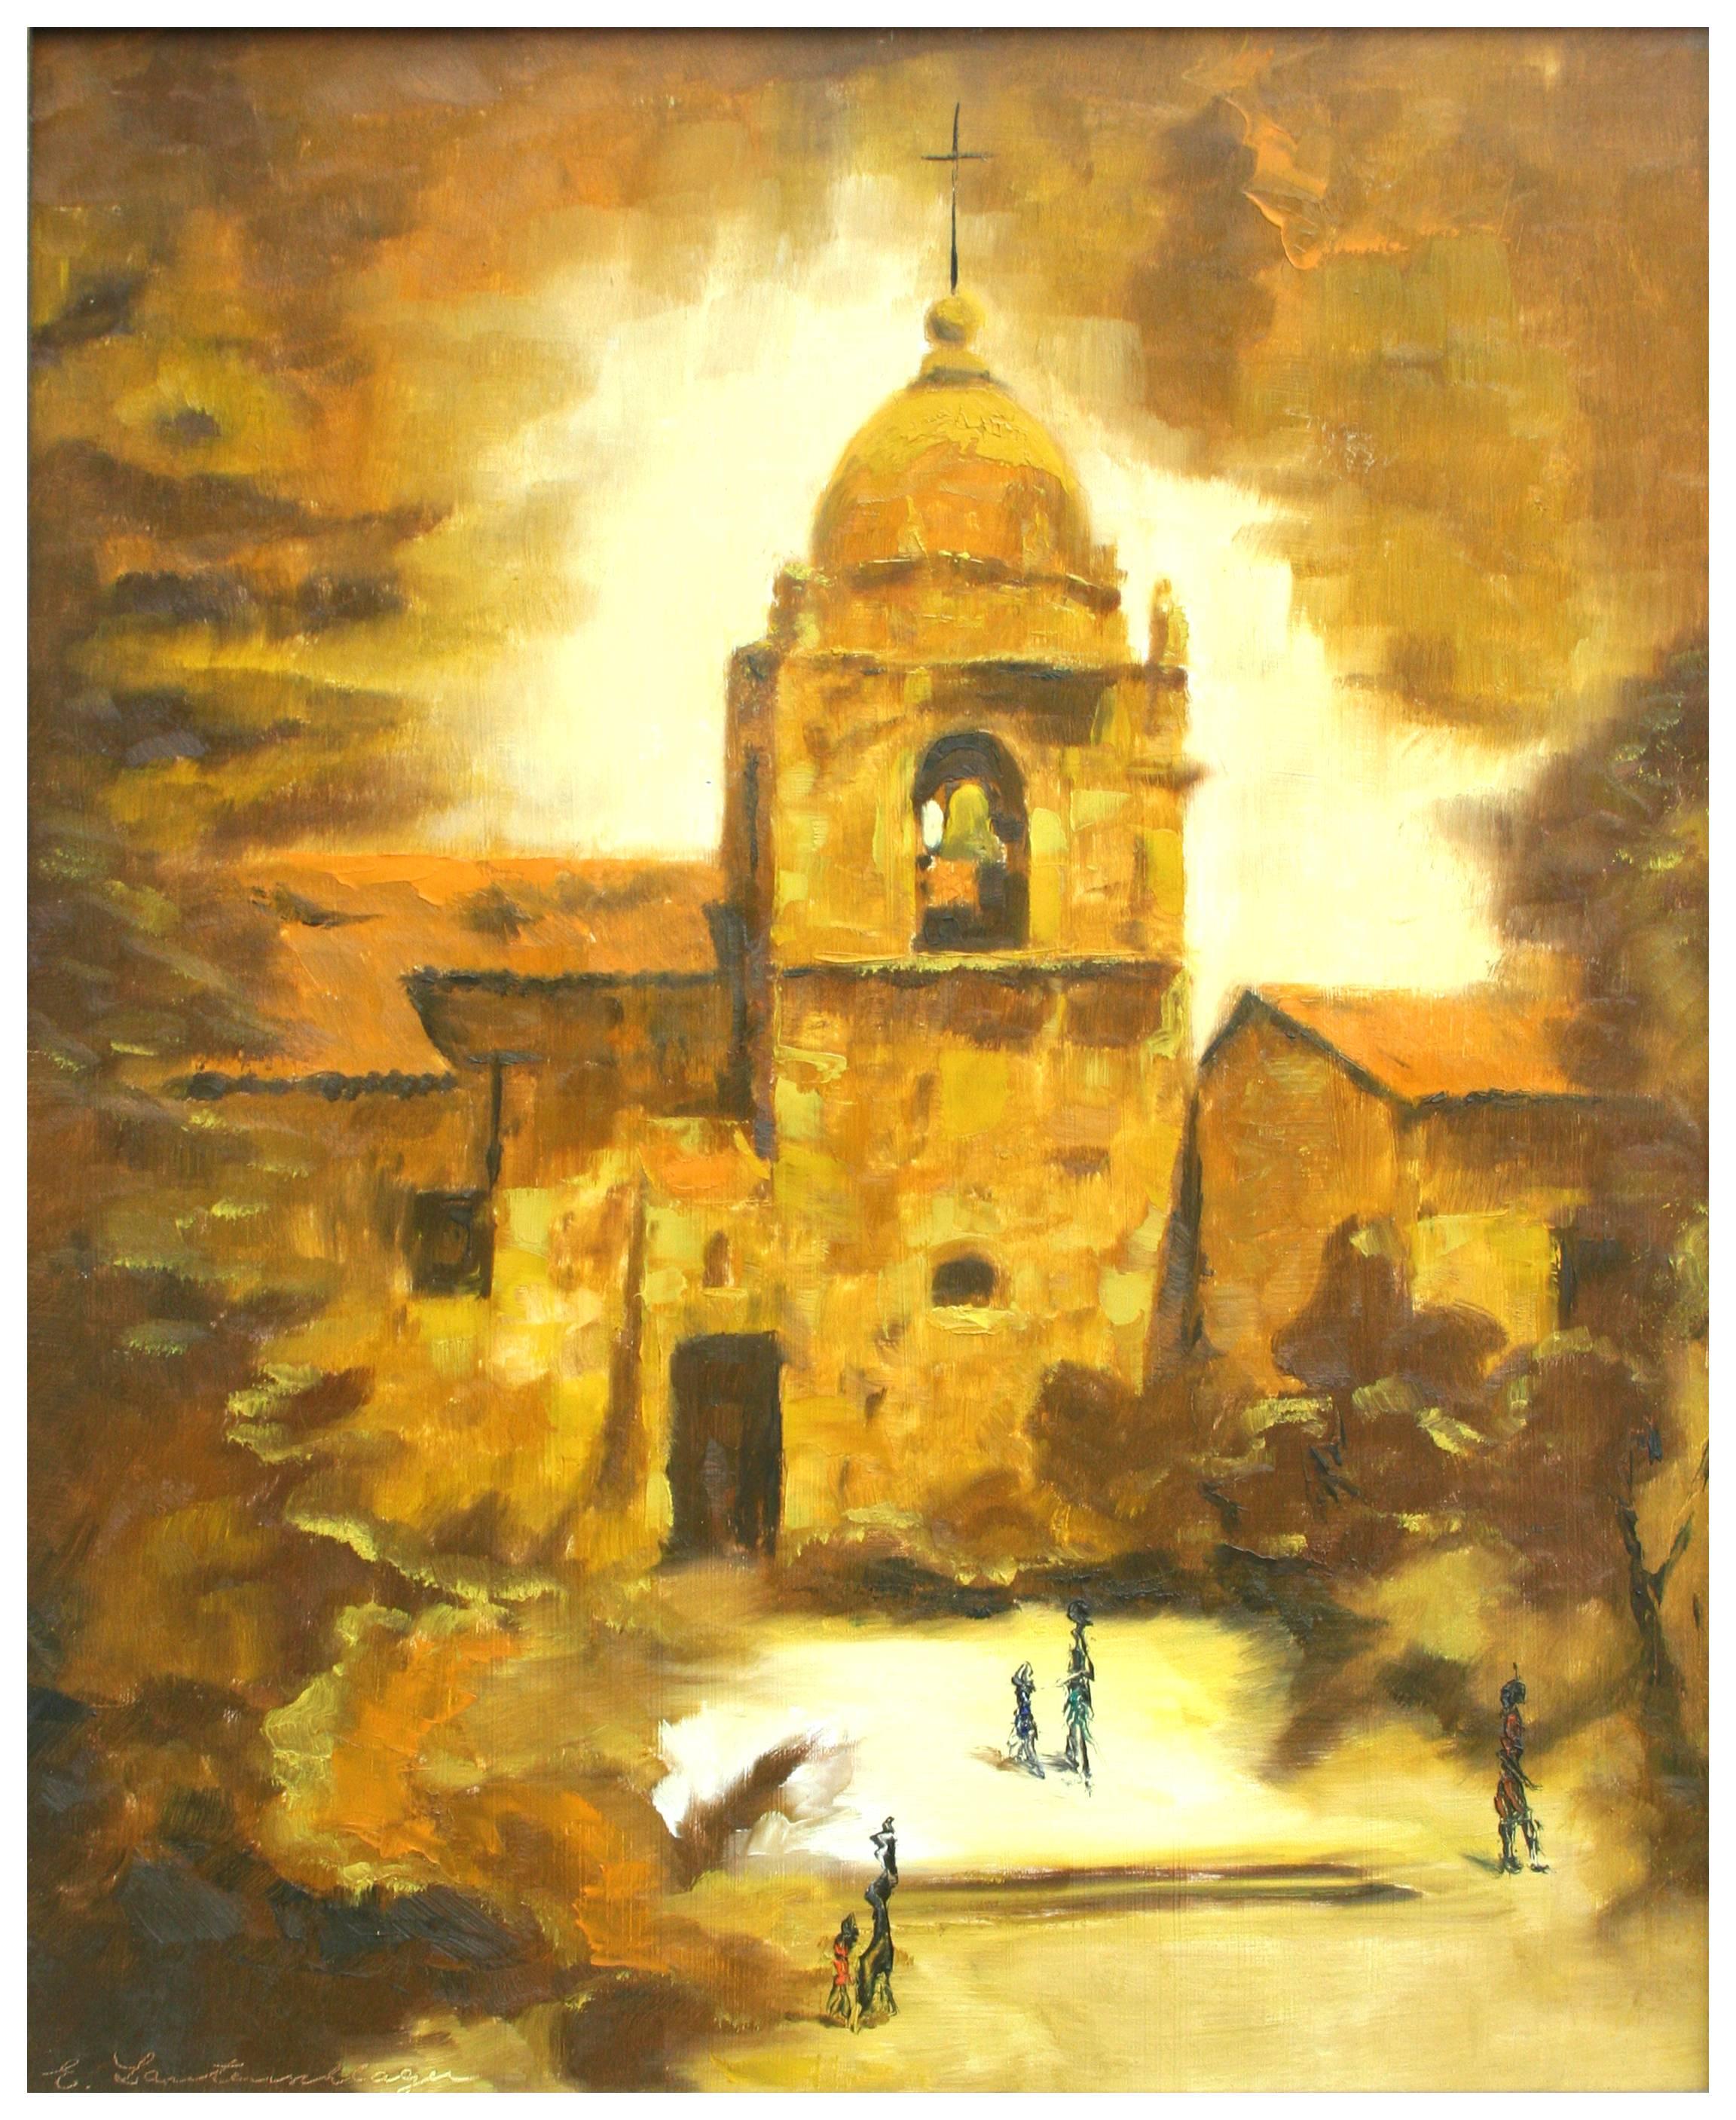 Mid Century Bell Tower Courtyard Figurative Landscape - Painting by E. Lautenschlager